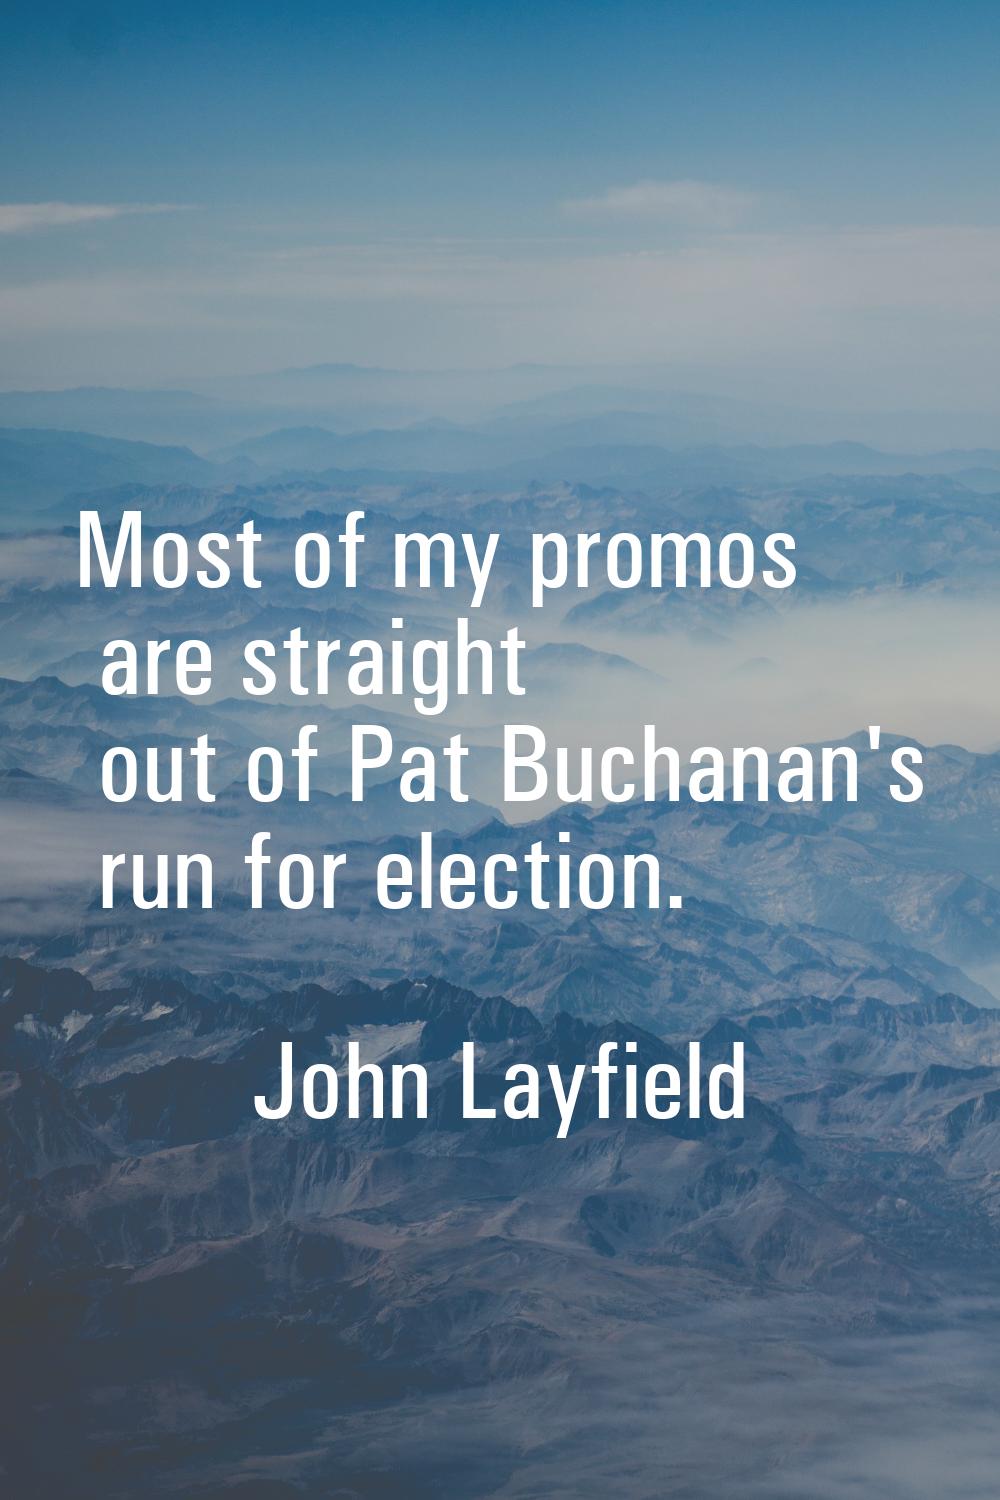 Most of my promos are straight out of Pat Buchanan's run for election.